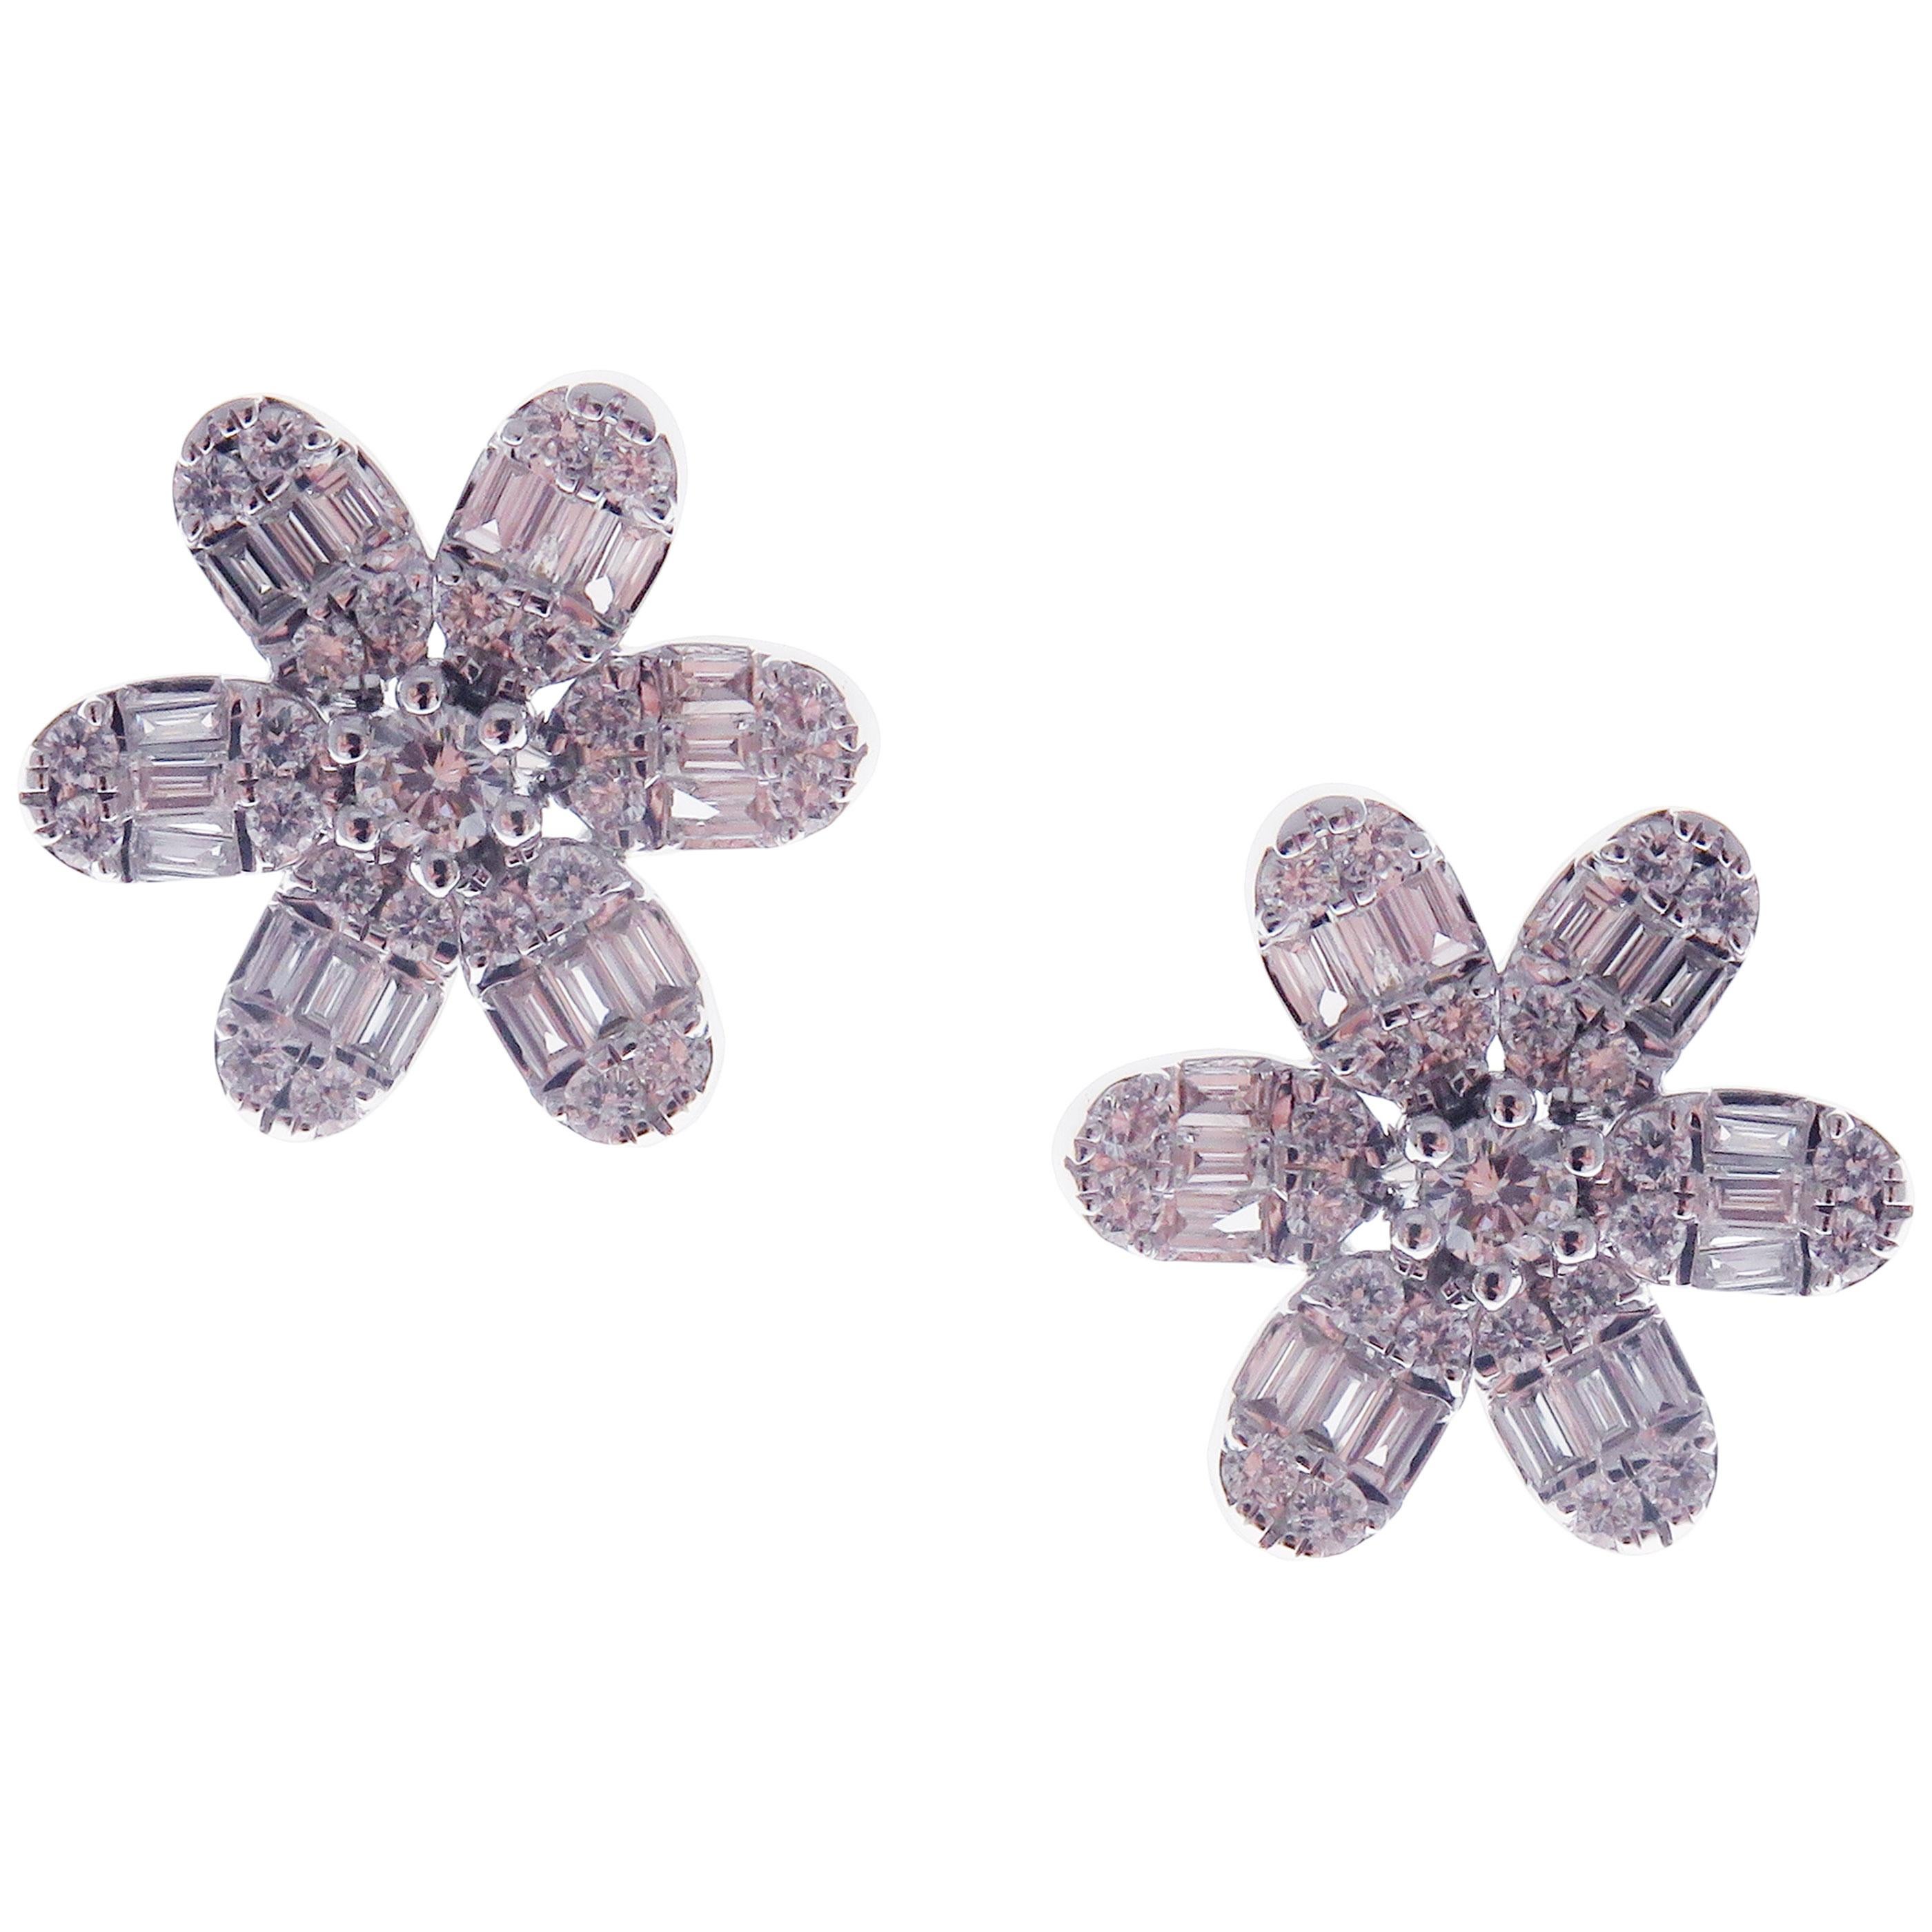 These classic flower stud earrings with round and baguette white diamonds are crafted in 18-karat white gold, featuring 50 round white diamonds totaling of 0.59 carats and 36 baguette white diamonds totaling of 0.39 carats.
These earrings come with